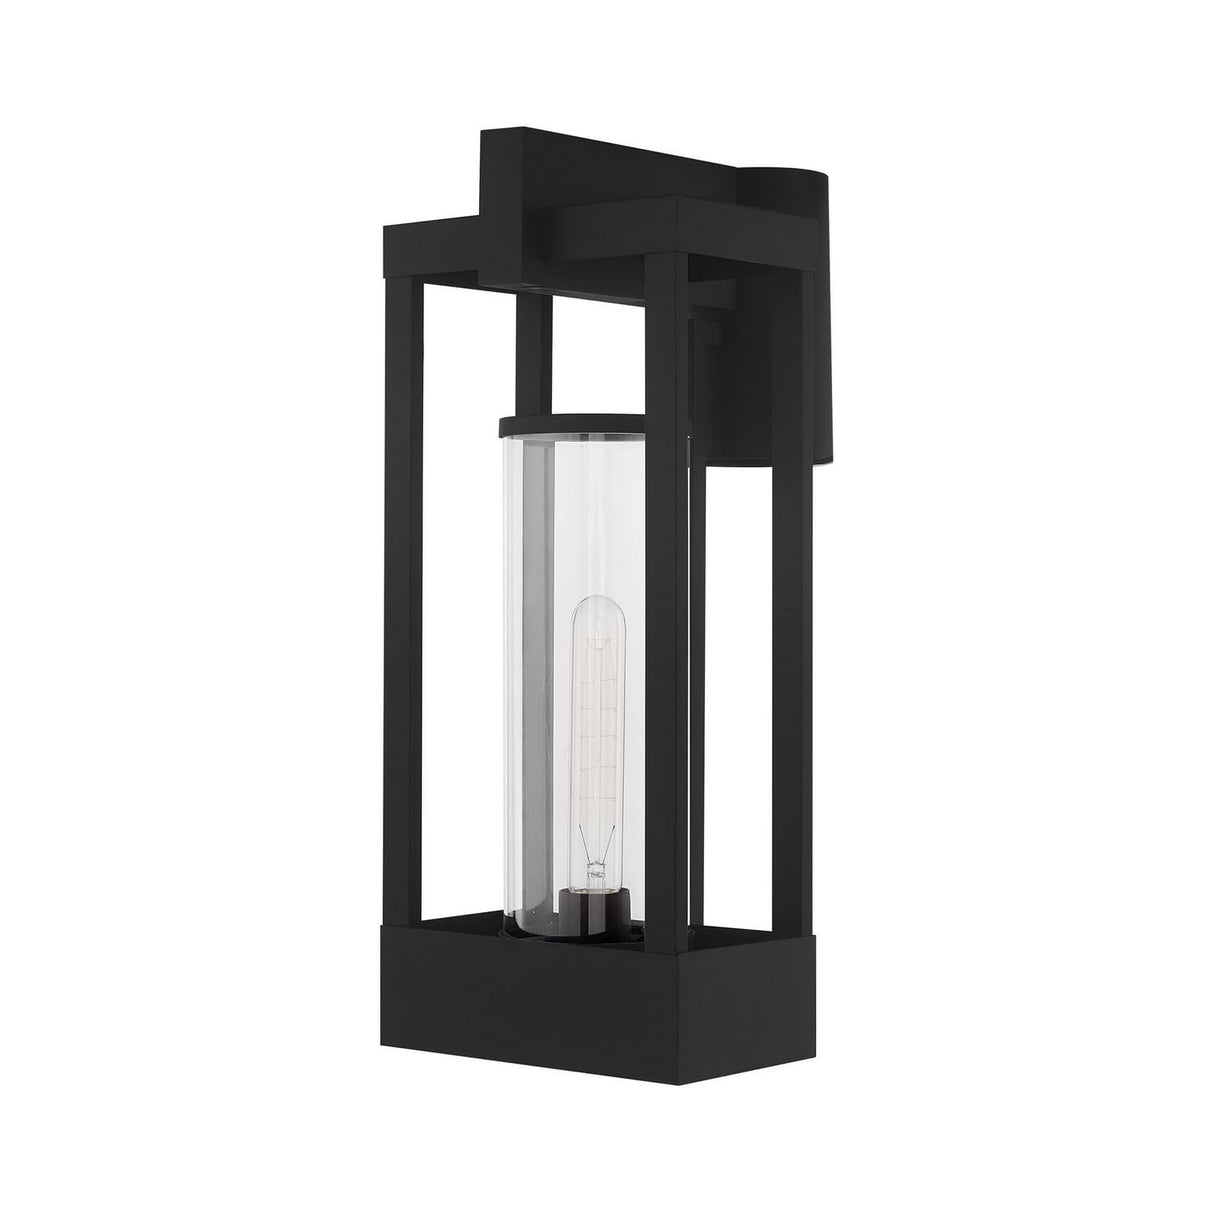 Livex Lighting 20996-04 Delancey - 18.88" One Light Outdoor Post Top Lantern, Black Finish with Clear Glass